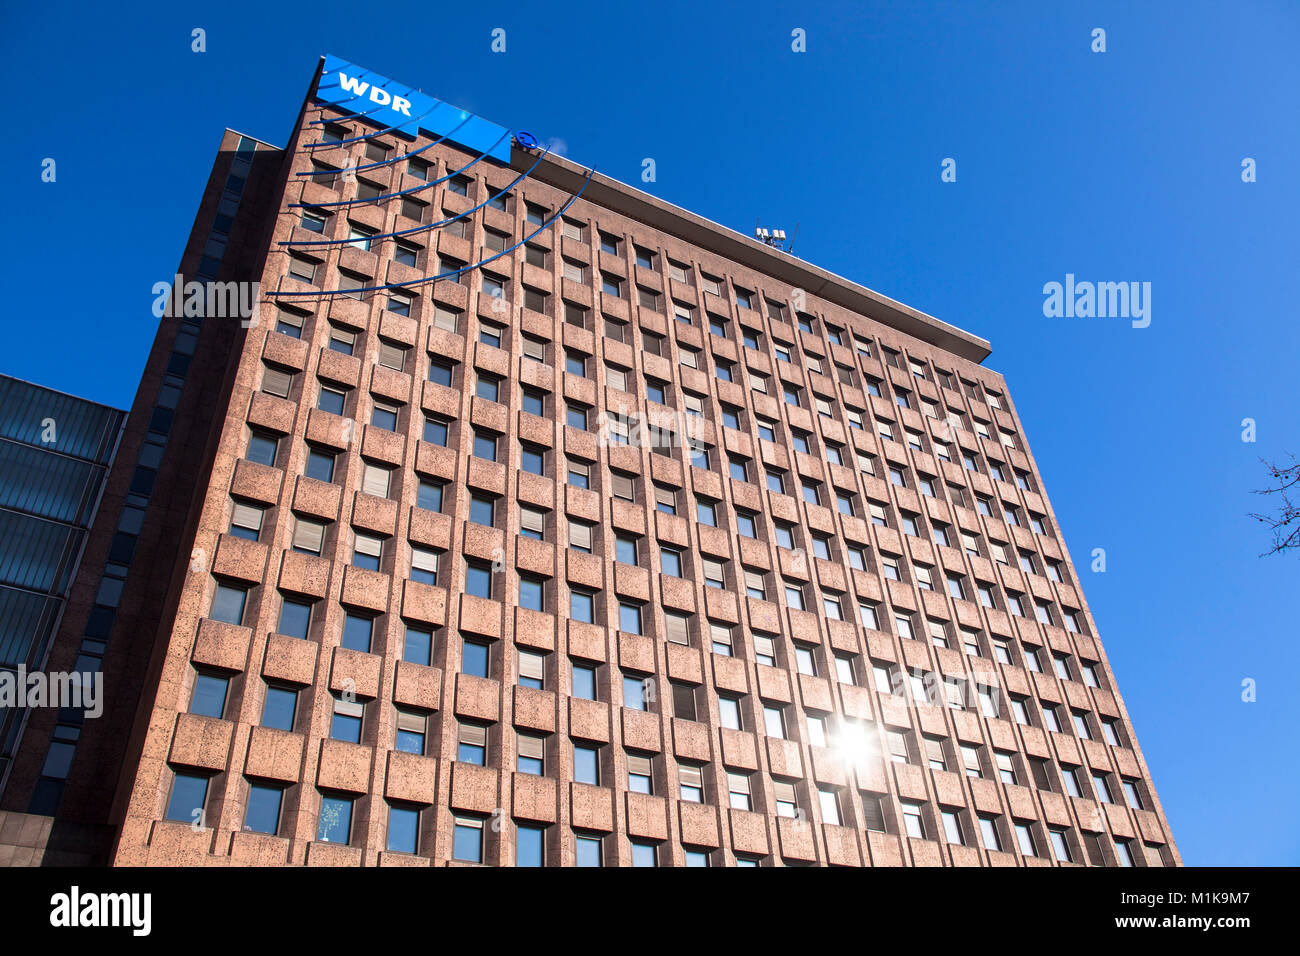 Germany, Cologne, the Archivhaus building of the Westdeutscher Rundfunk or West German Broadcasting Cologne, a German public-broadcasting institution  Stock Photo